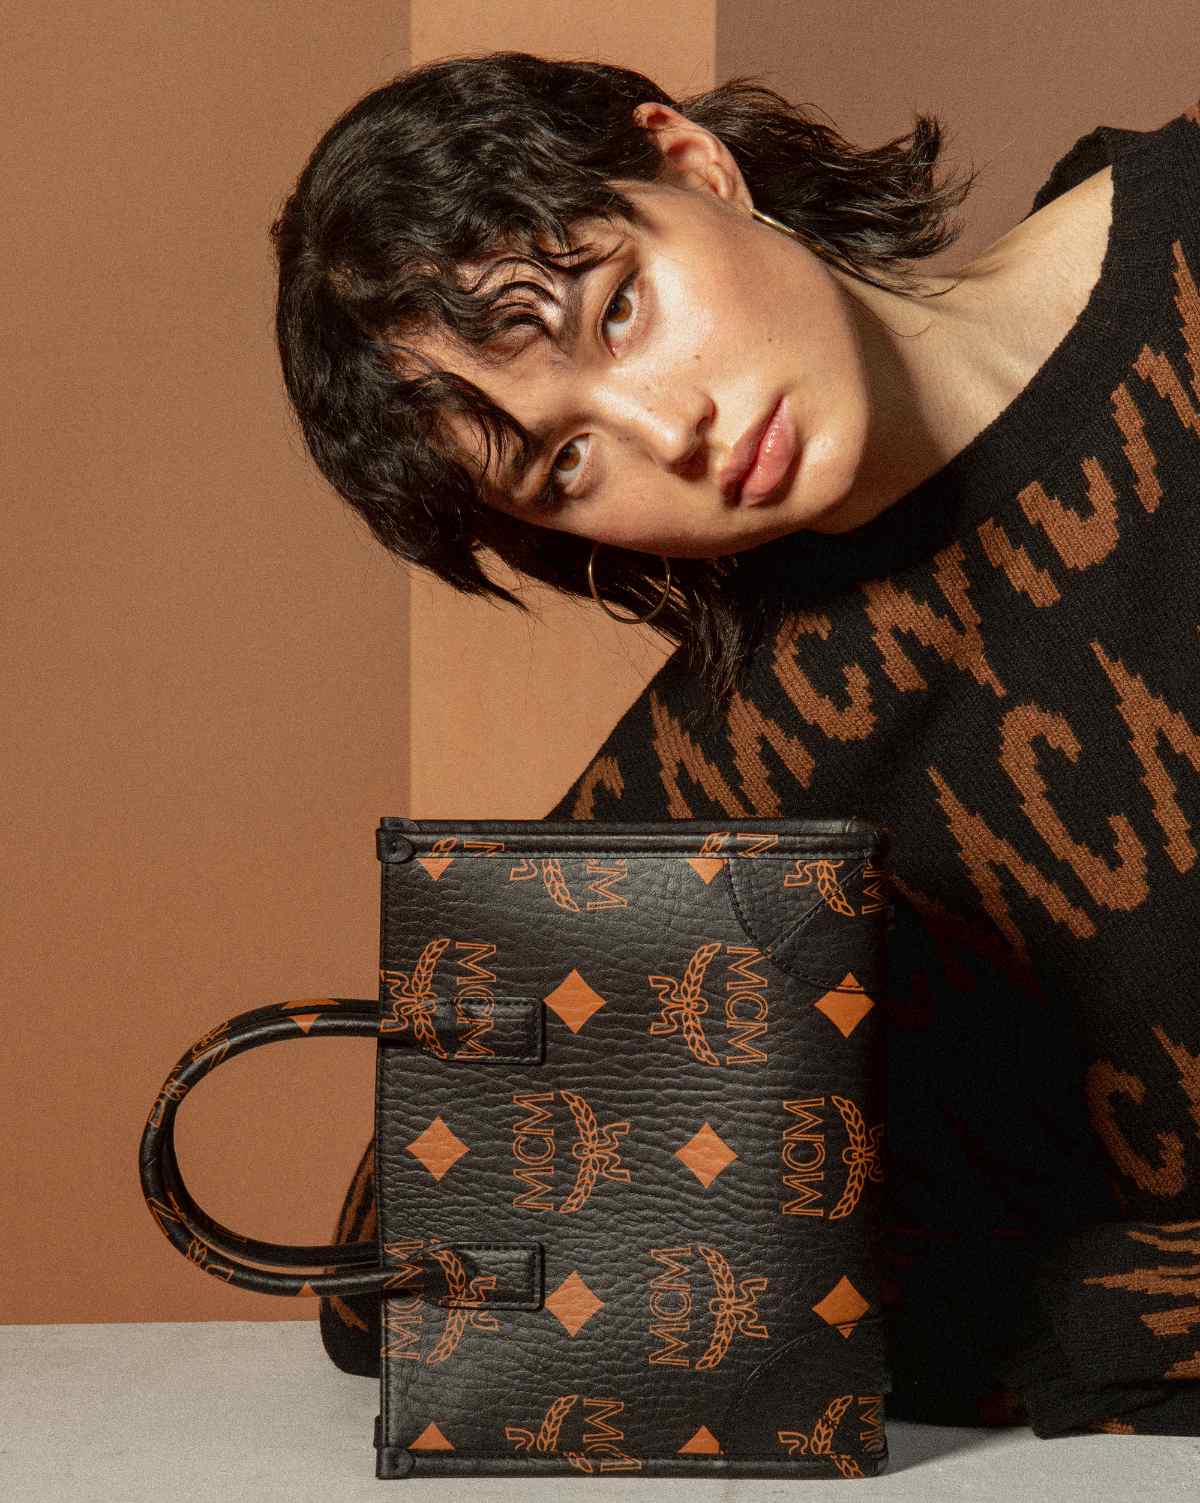 MCM Launches The New Collection Maxi Monogram With “Take Off” Campaign